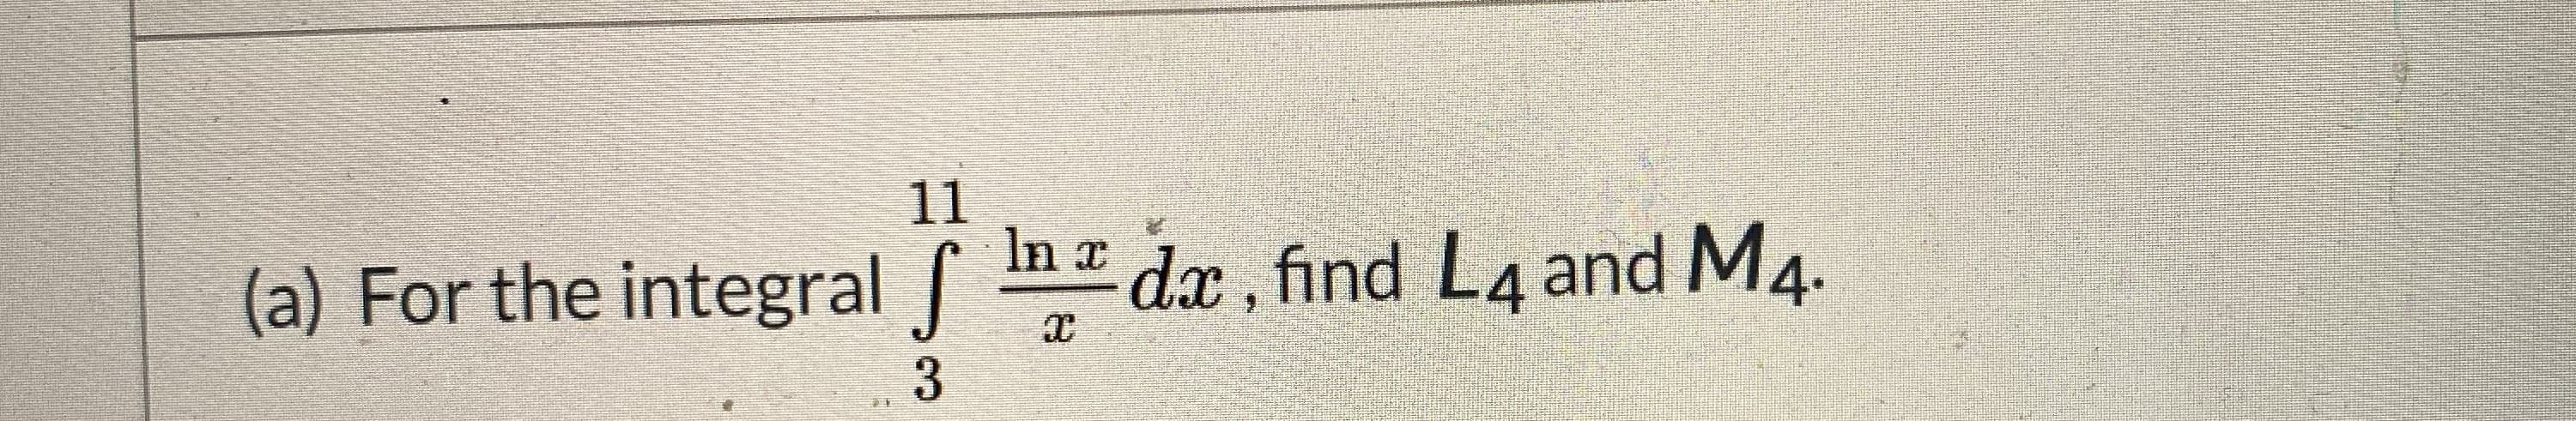 11
For the integral
In a dx, find L4 and M4.
